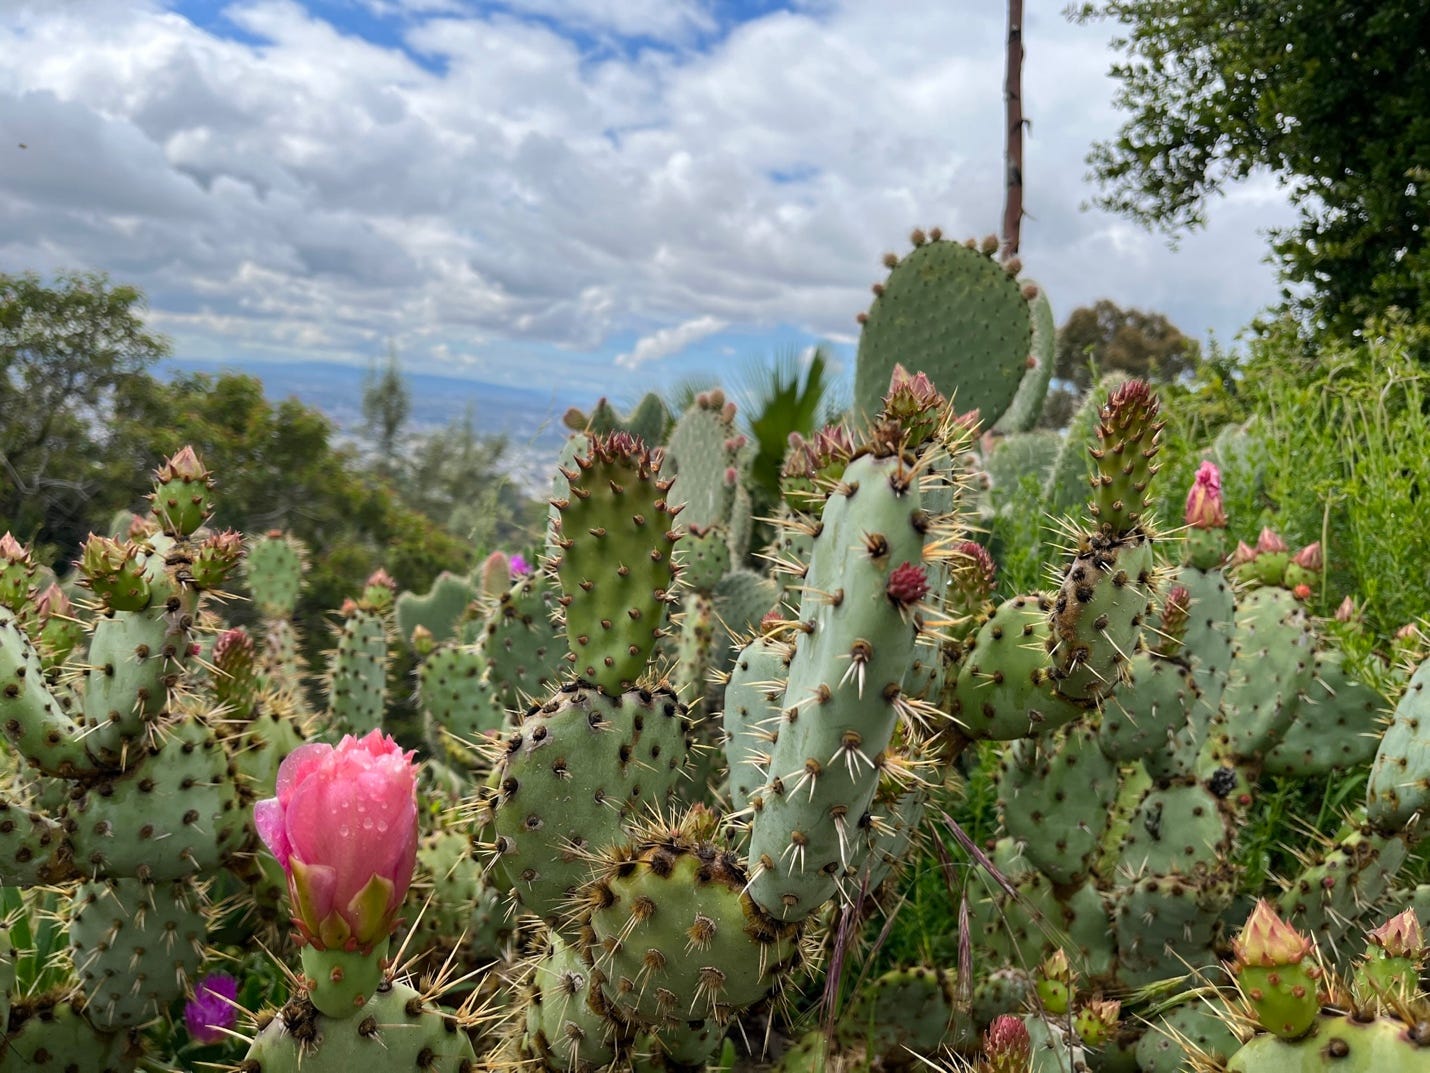 A group of cactus plants with a pink flower

Description automatically generated with low confidence